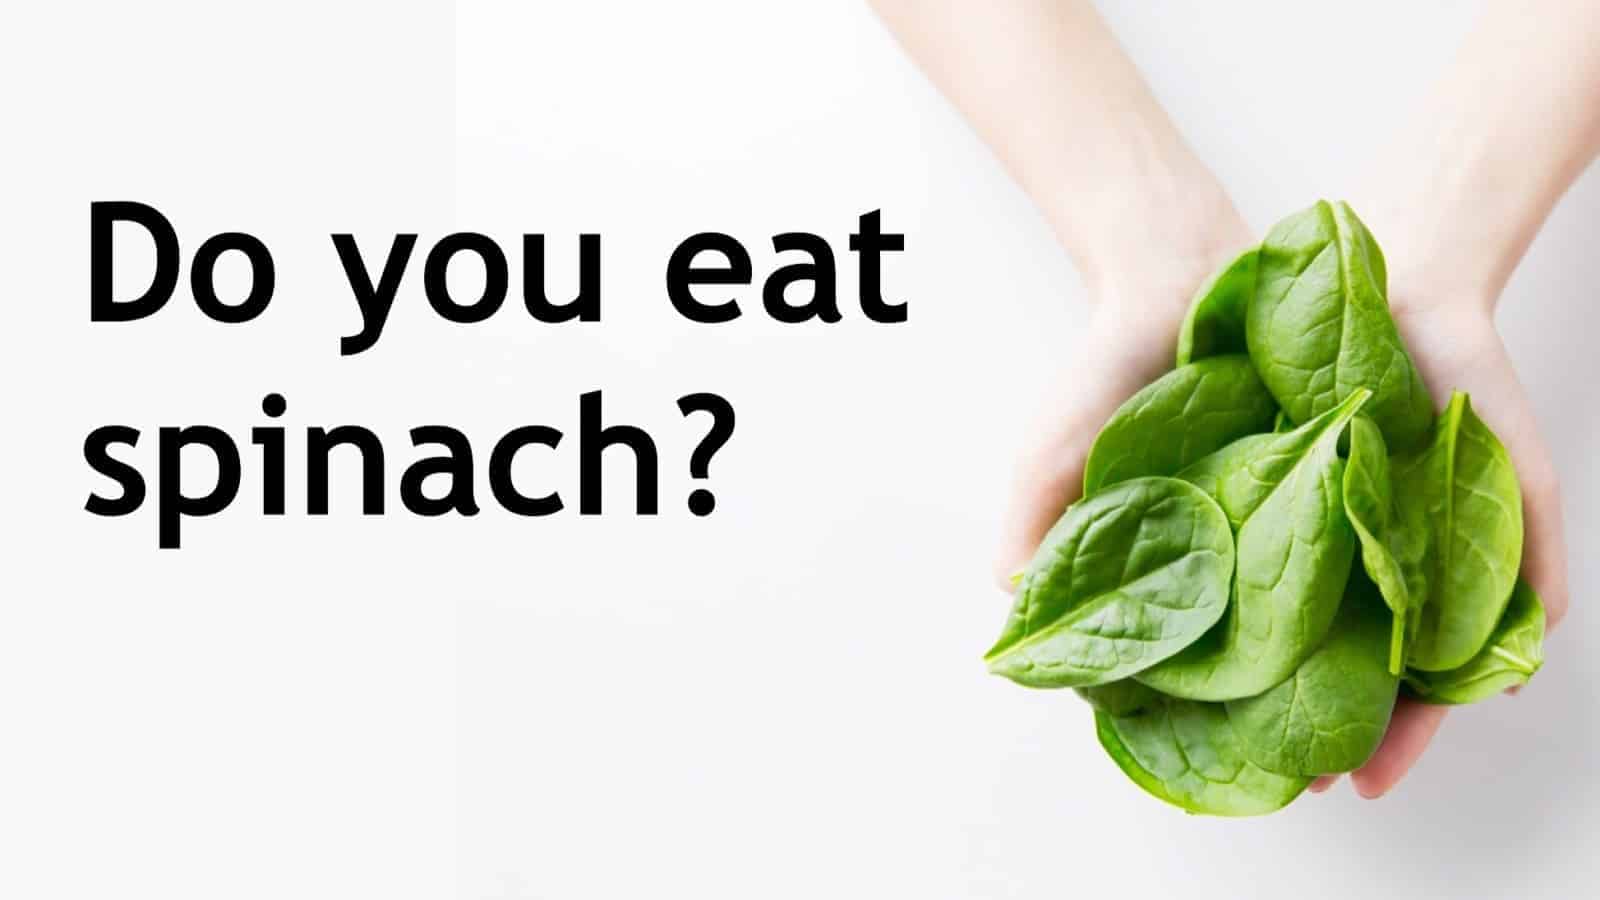 5 Reasons to Eat Spinach Every Day, According to Science